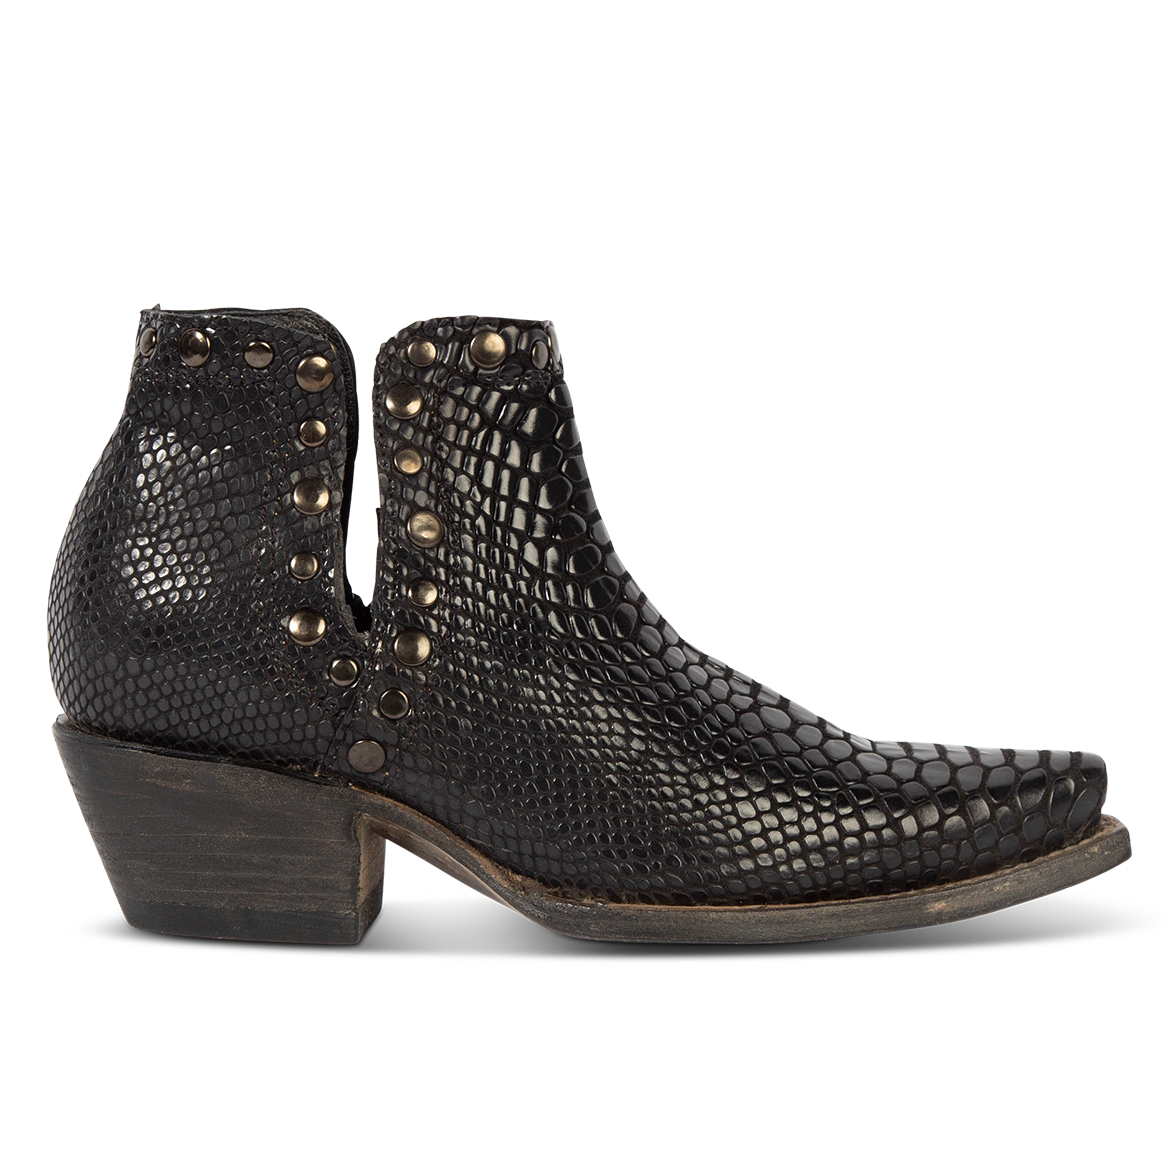 FREEBIRD women's Mandy black embossed leather ankle bootie with exposed ankle cutouts, studded detailing and snip toe construction